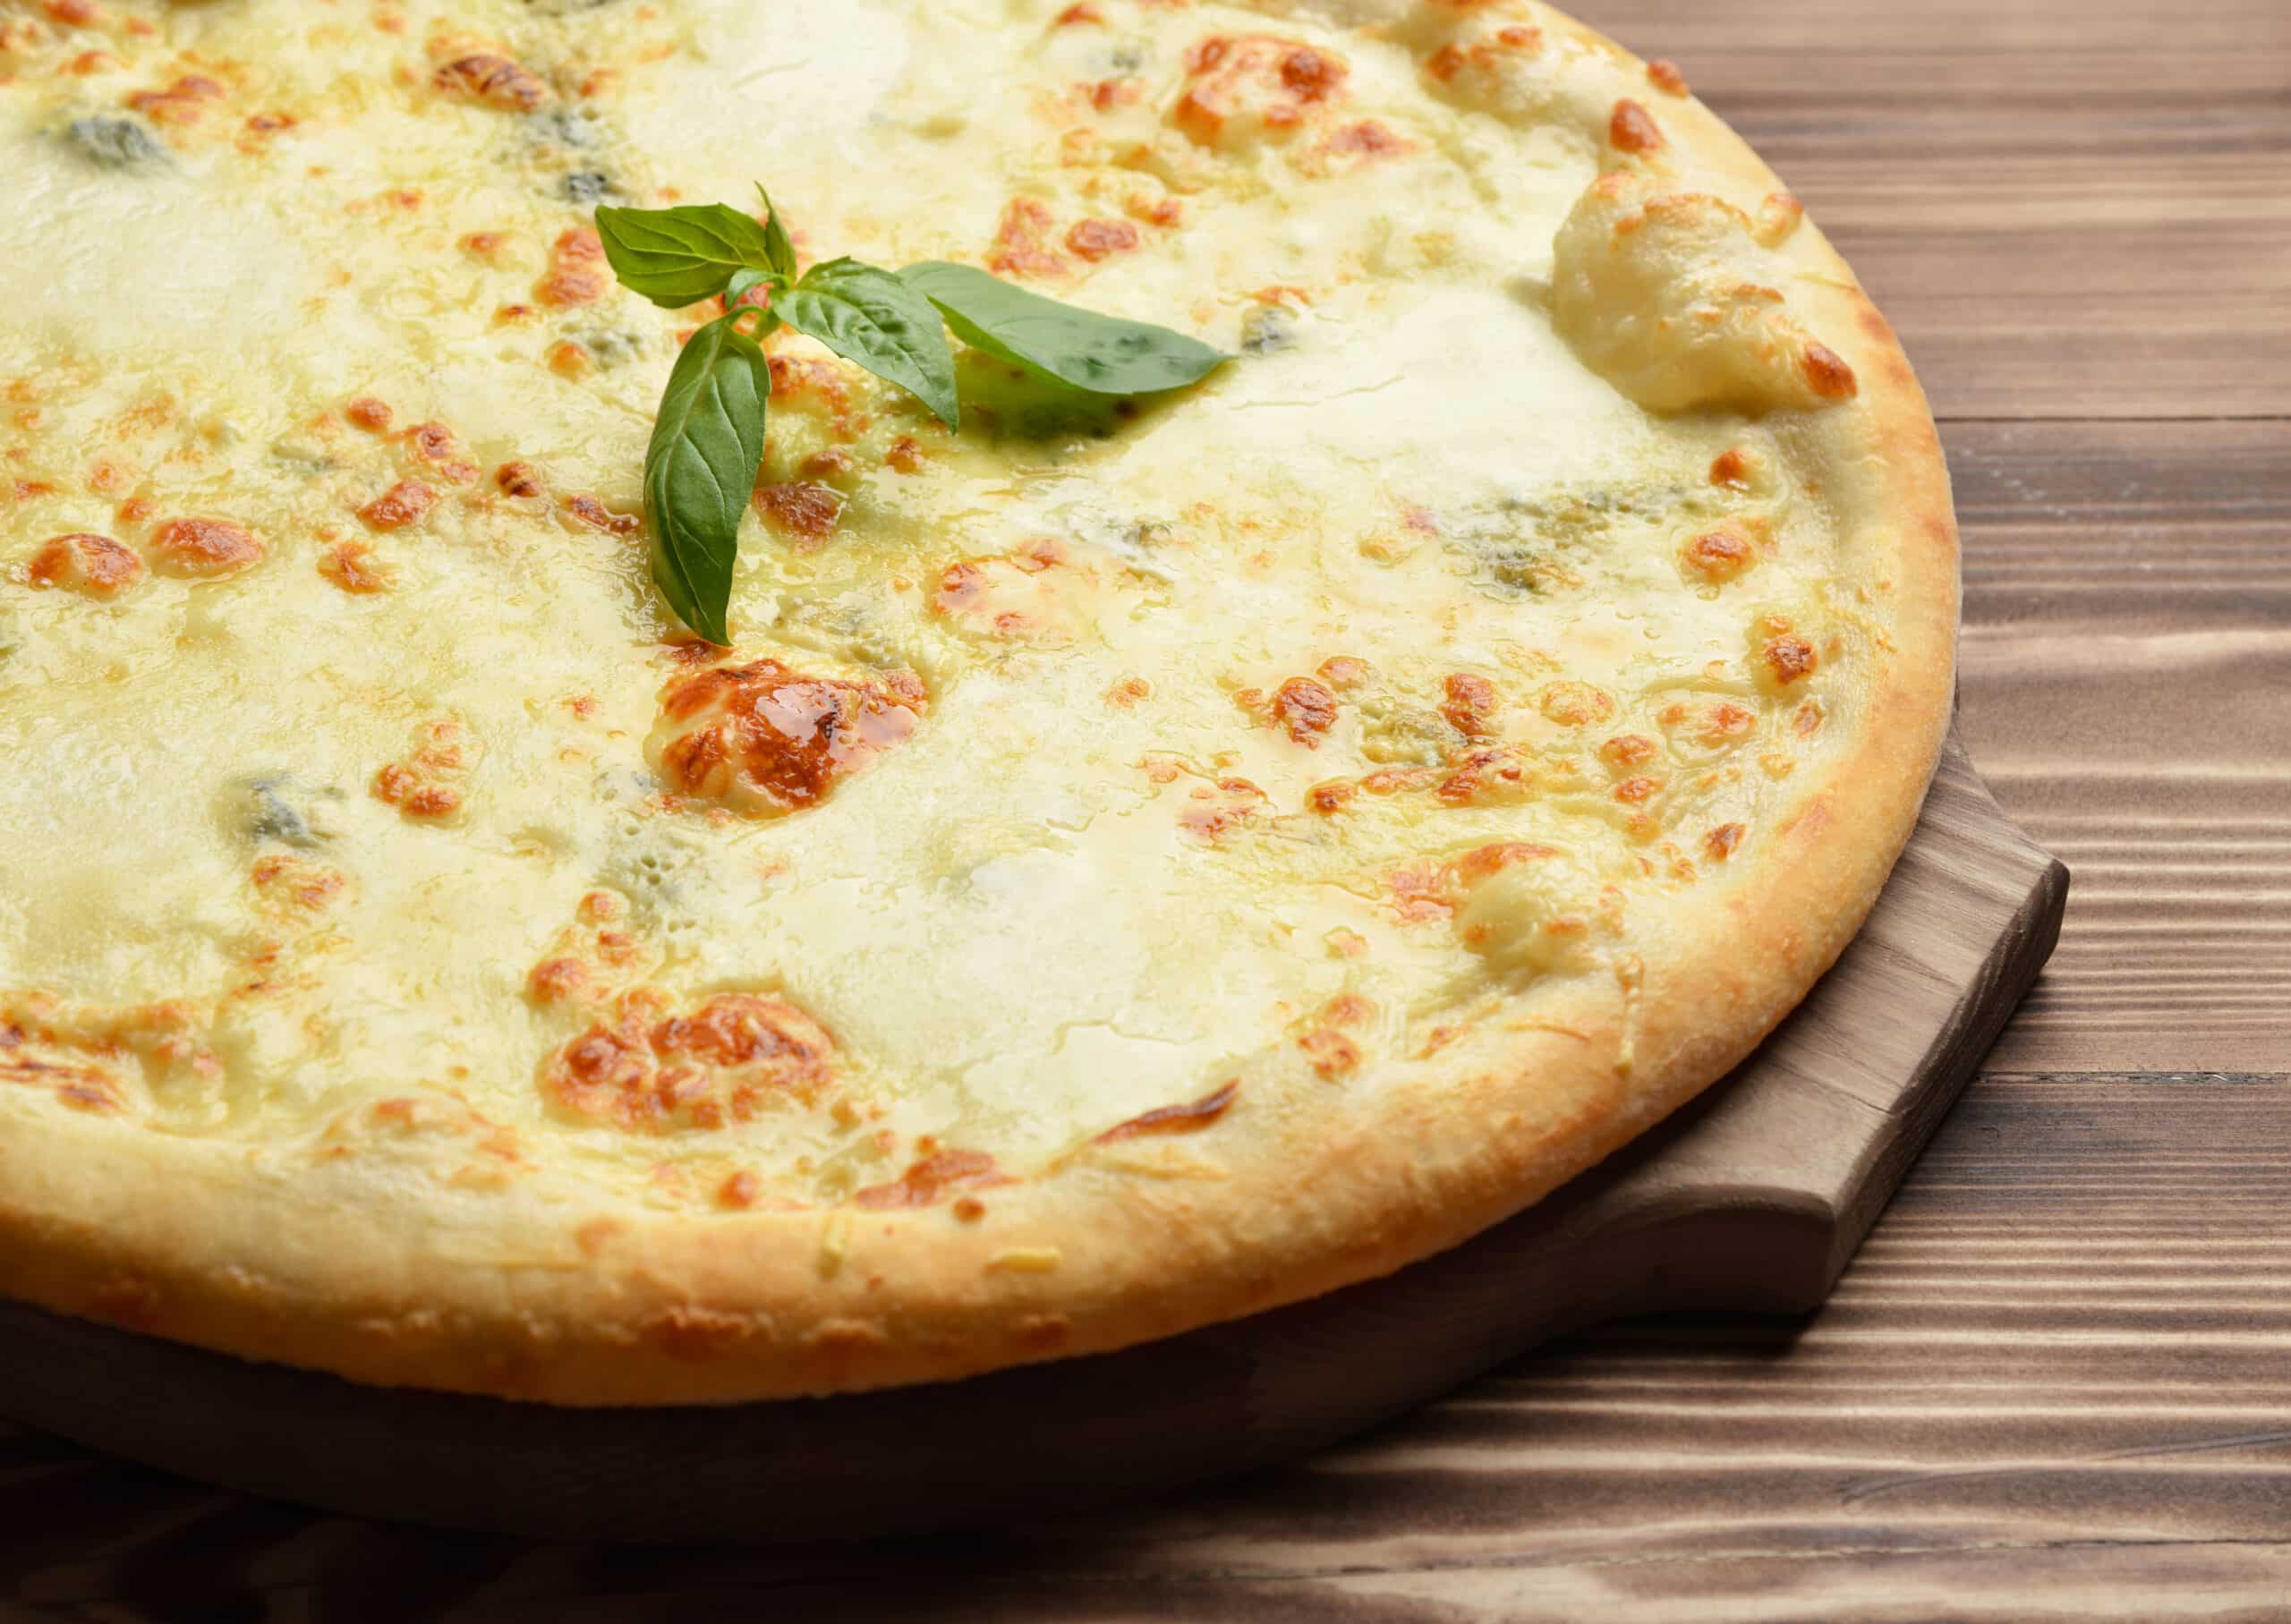 Summer Food: The Four Cheese Pizza